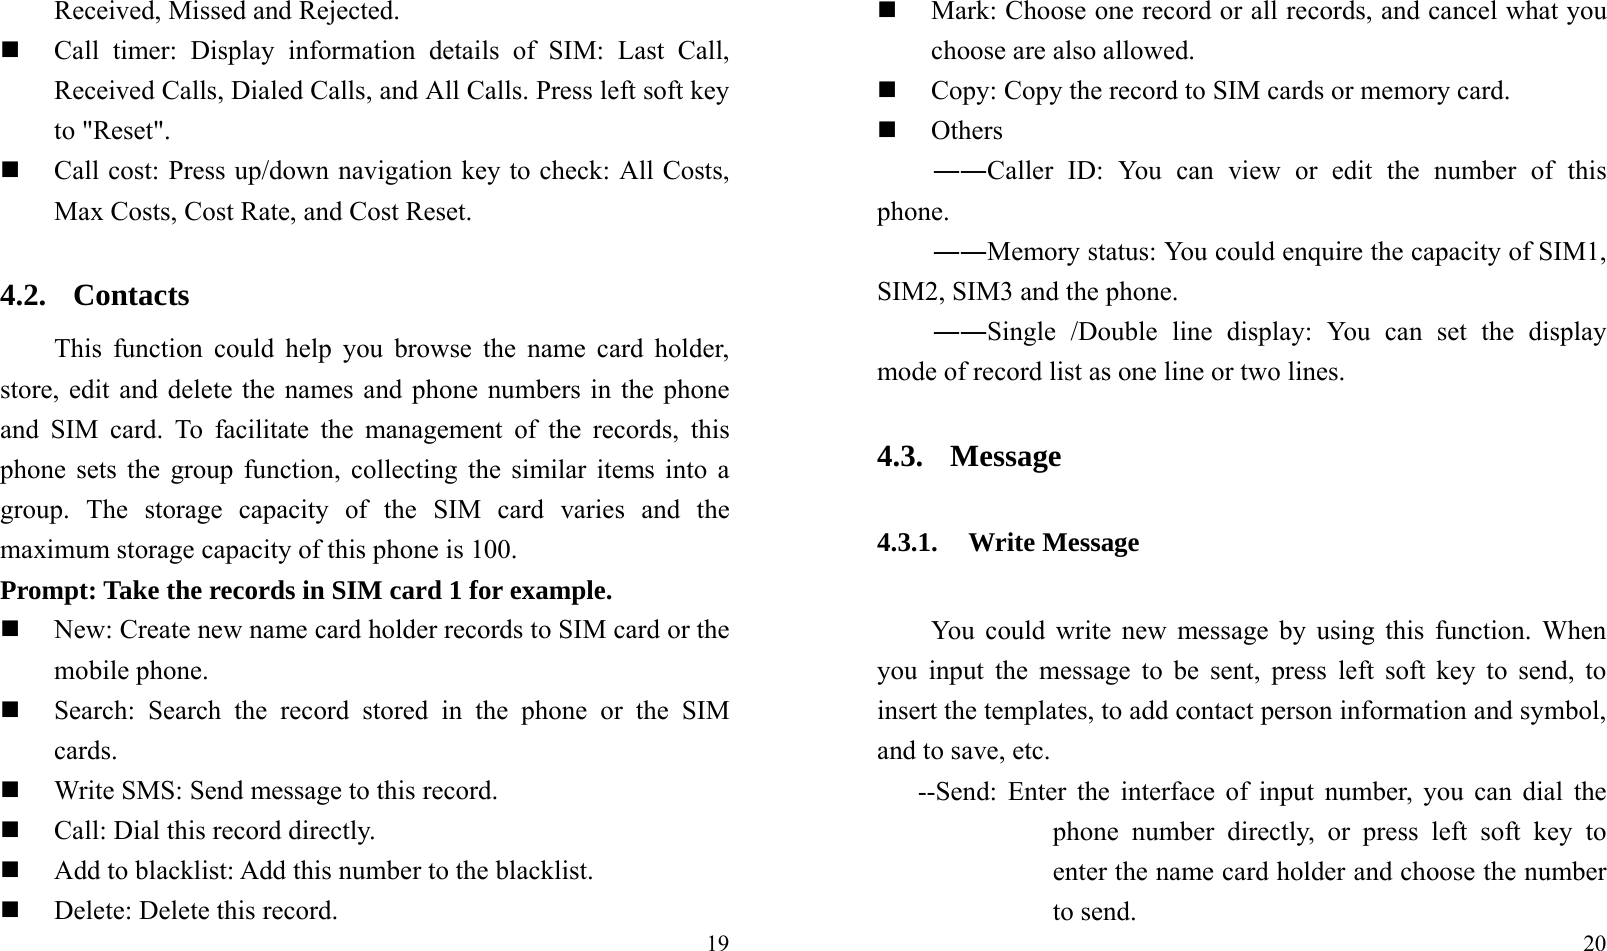  19Received, Missed and Rejected.  Call timer: Display information details of SIM: Last Call, Received Calls, Dialed Calls, and All Calls. Press left soft key to &quot;Reset&quot;.  Call cost: Press up/down navigation key to check: All Costs, Max Costs, Cost Rate, and Cost Reset. 4.2. Contacts This function could help you browse the name card holder, store, edit and delete the names and phone numbers in the phone and SIM card. To facilitate the management of the records, this phone sets the group function, collecting the similar items into a group. The storage capacity of the SIM card varies and the maximum storage capacity of this phone is 100. Prompt: Take the records in SIM card 1 for example.  New: Create new name card holder records to SIM card or the mobile phone.  Search: Search the record stored in the phone or the SIM cards.  Write SMS: Send message to this record.  Call: Dial this record directly.  Add to blacklist: Add this number to the blacklist.  Delete: Delete this record.  20  Mark: Choose one record or all records, and cancel what you choose are also allowed.  Copy: Copy the record to SIM cards or memory card.  Others ――Caller ID: You can view or edit the number of this phone. ――Memory status: You could enquire the capacity of SIM1, SIM2, SIM3 and the phone. ――Single /Double line display: You can set the display mode of record list as one line or two lines. 4.3. Message 4.3.1. Write Message You could write new message by using this function. When you input the message to be sent, press left soft key to send, to insert the templates, to add contact person information and symbol, and to save, etc. --Send: Enter the interface of input number, you can dial the phone number directly, or press left soft key to enter the name card holder and choose the number to send. 